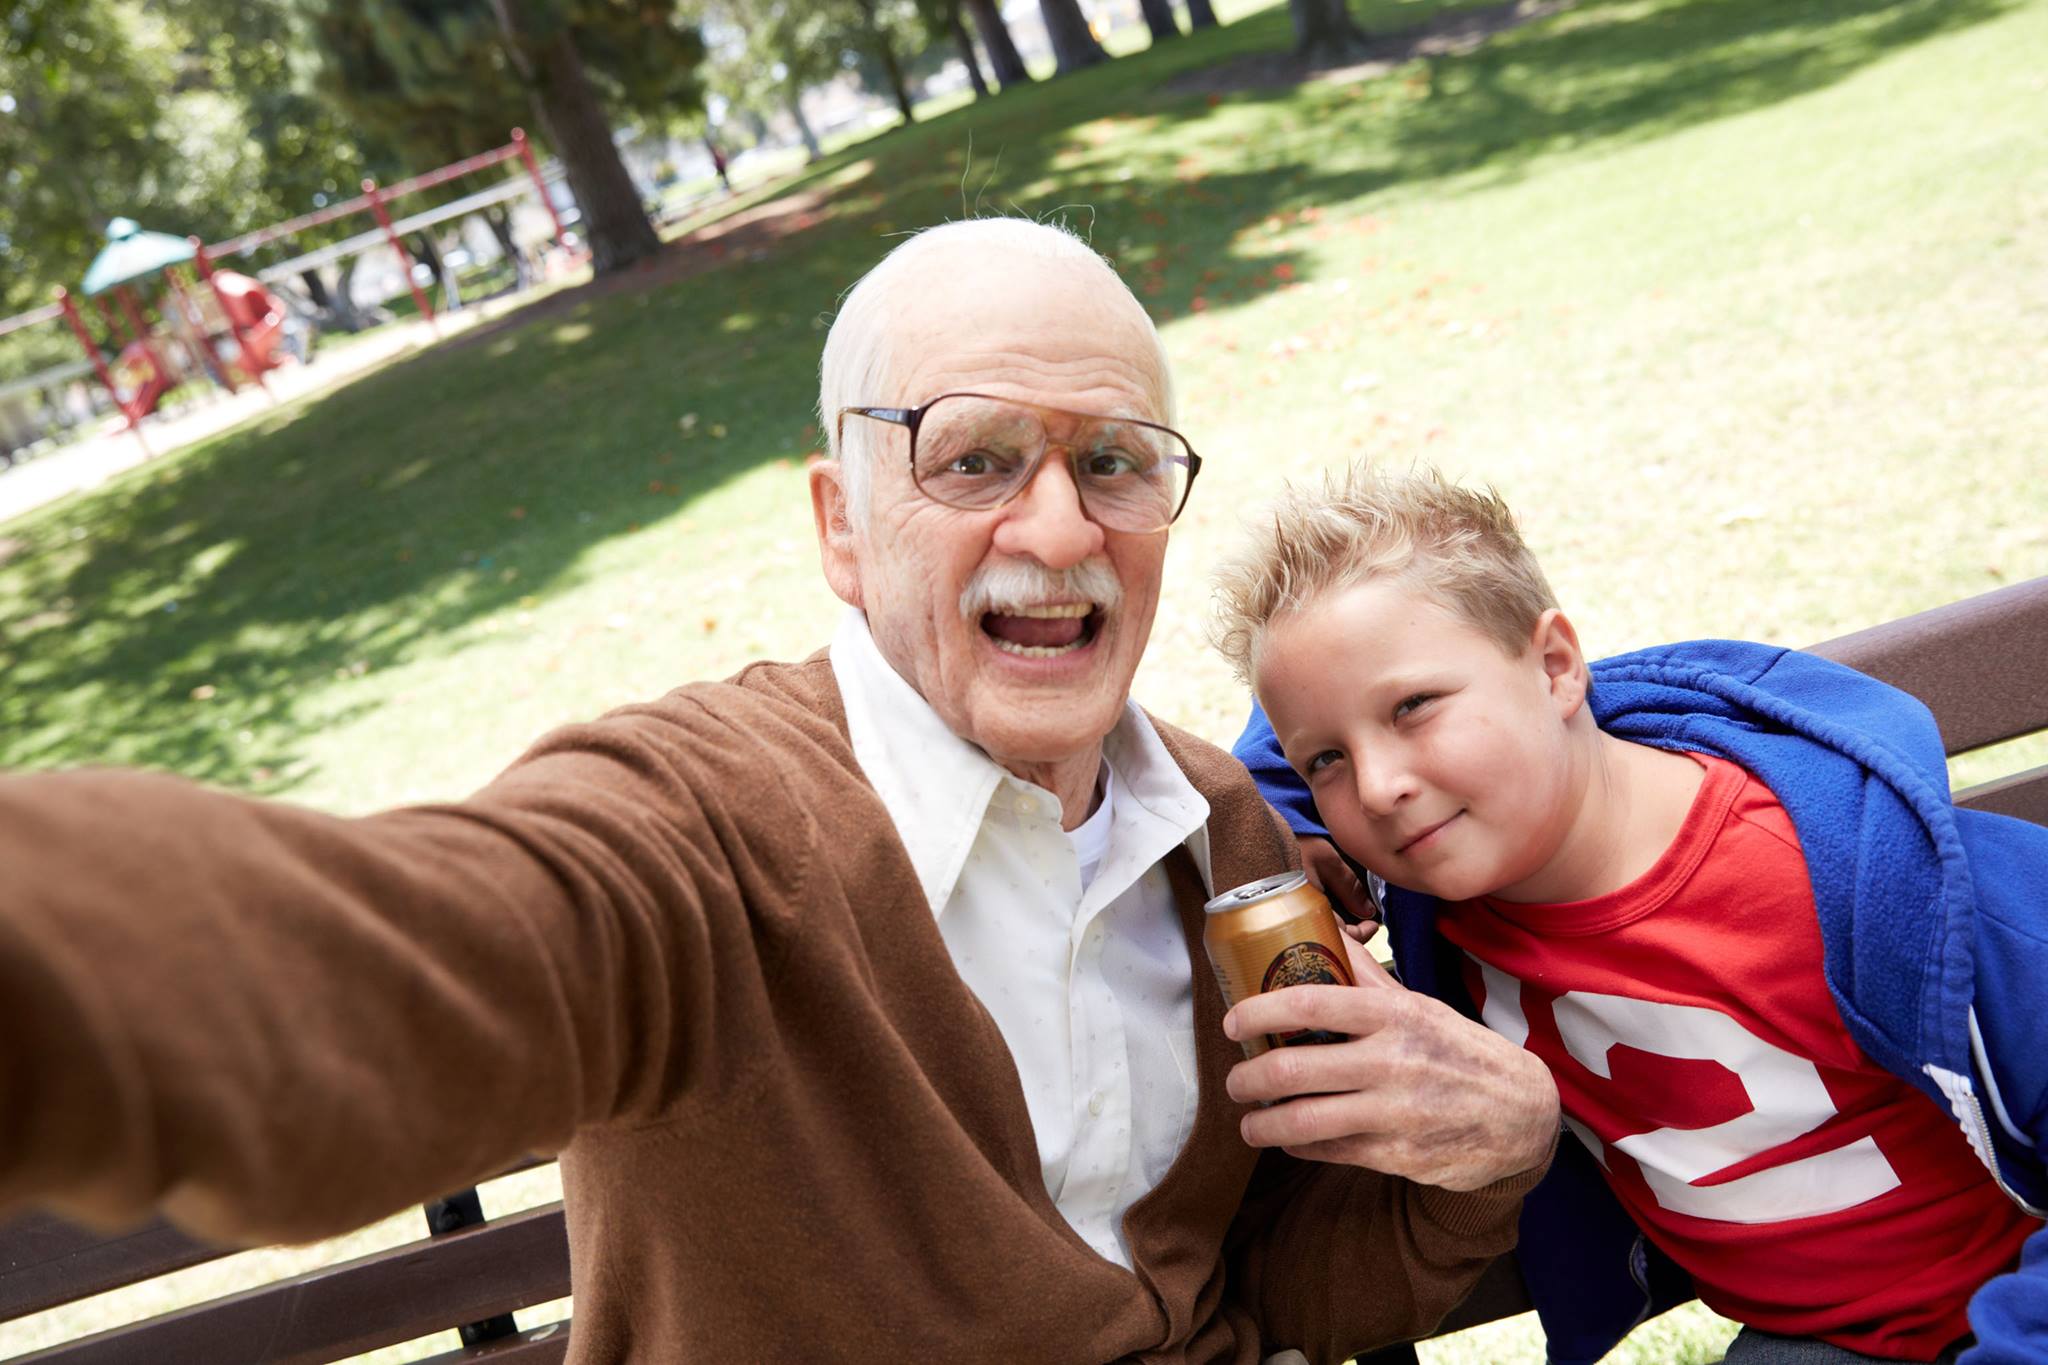 facebook.comIrving Zisman (Johnny Knoxville) and Billy (Jackson Nicoll) get themselves into plenty of mischief on their road trip to North Carolina to reunite Billy with his father. ‘Bad Grandpa’ made $32 million its opening weekend.